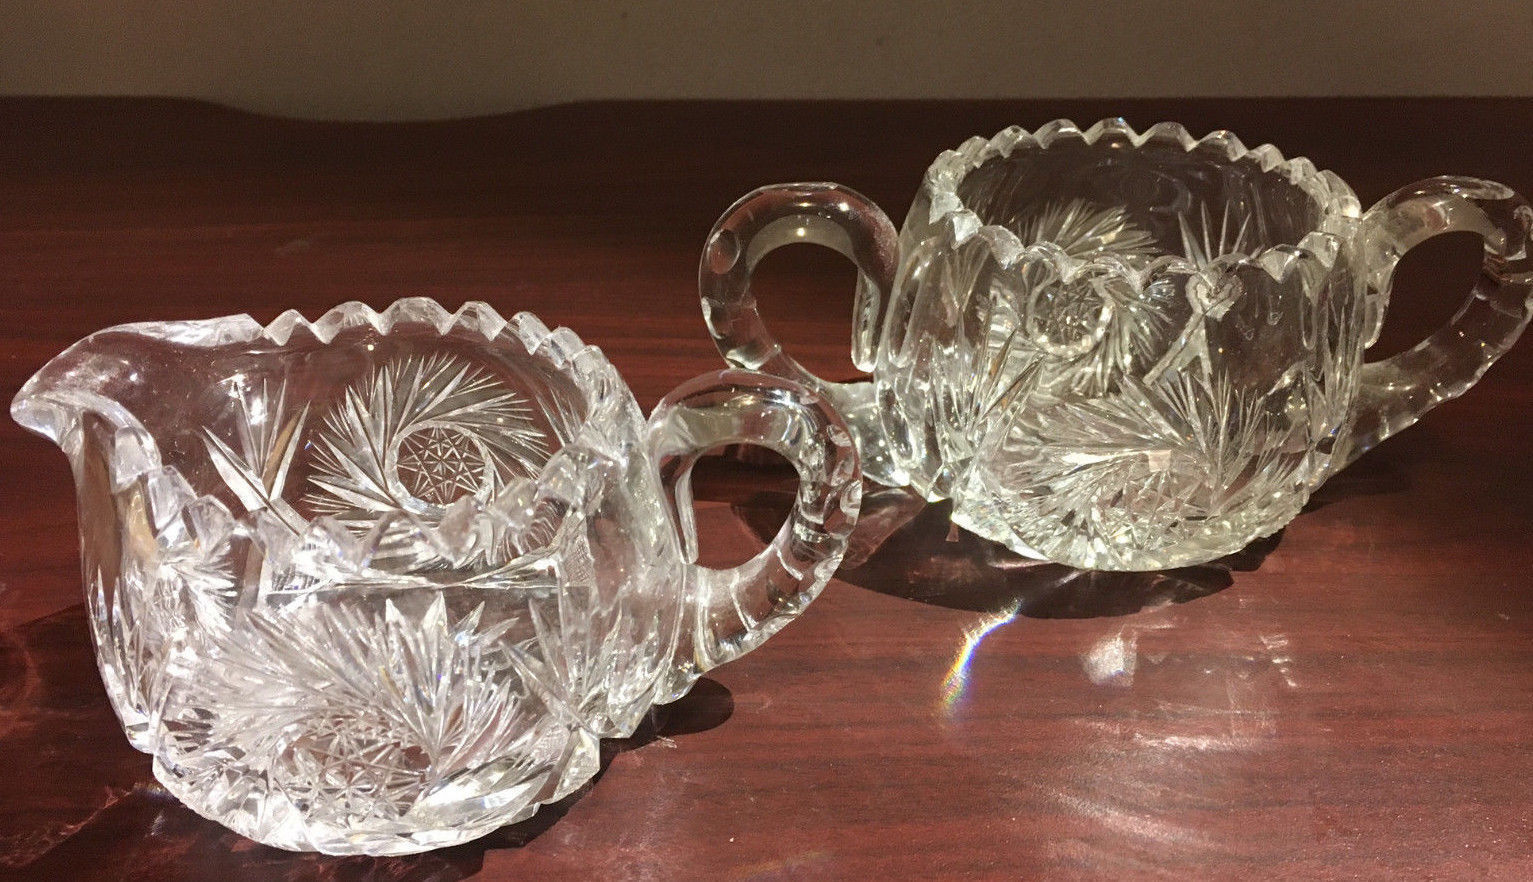 Vintage Etched Glass Cream and Sugar Set